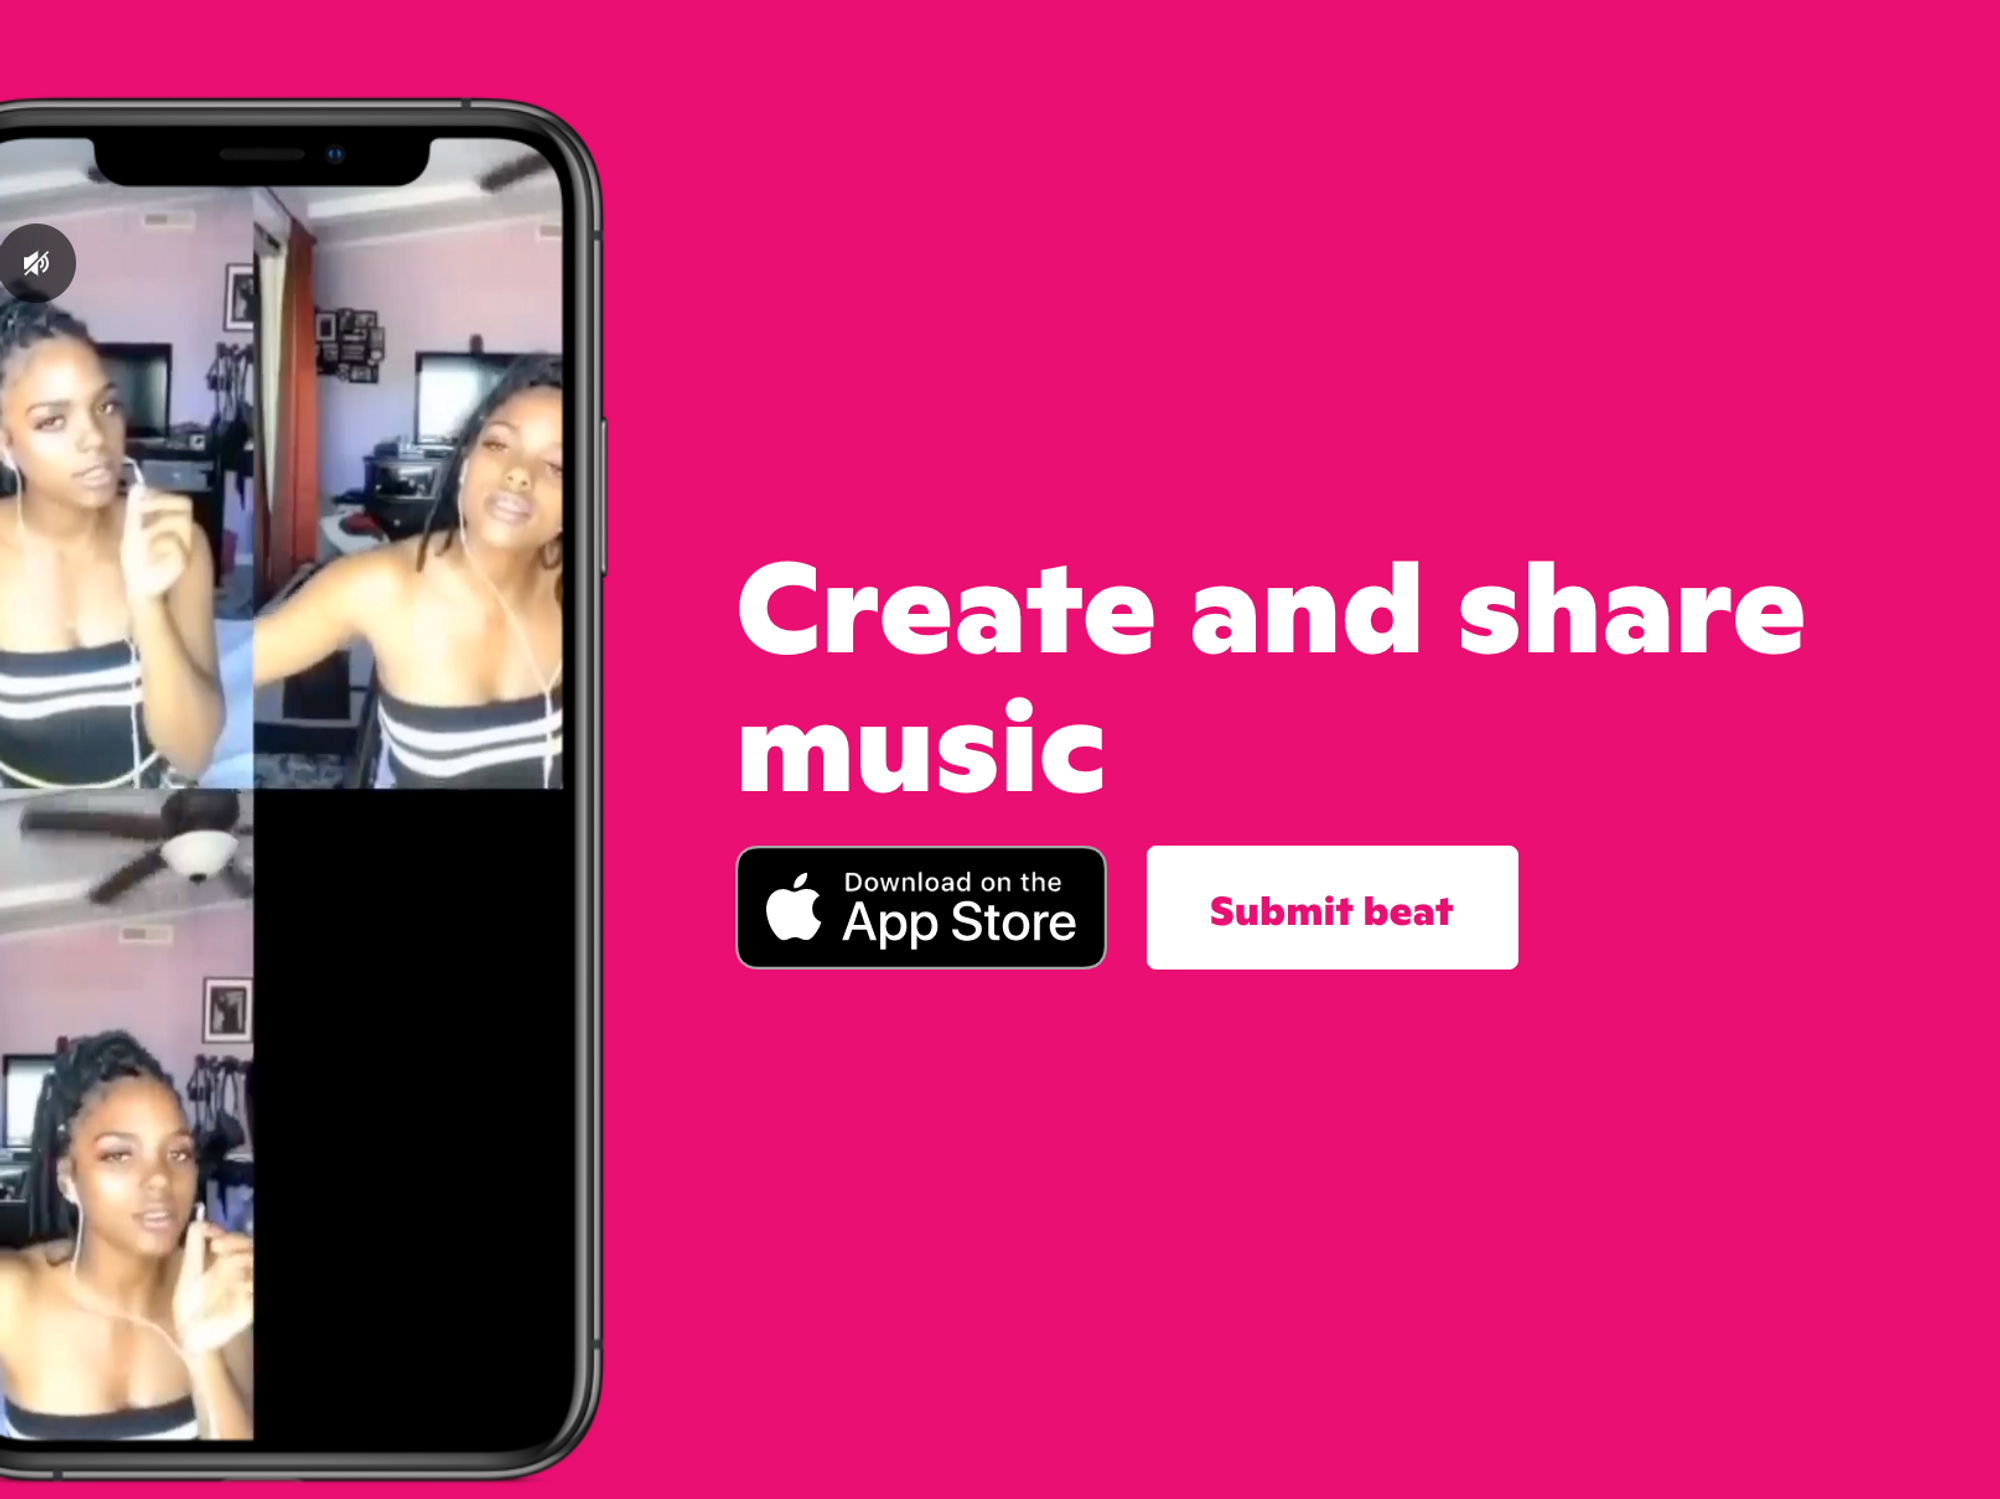 Snap Acquires Songwriting Startup Voisey, as Music Tech Gains Traction in Social Media